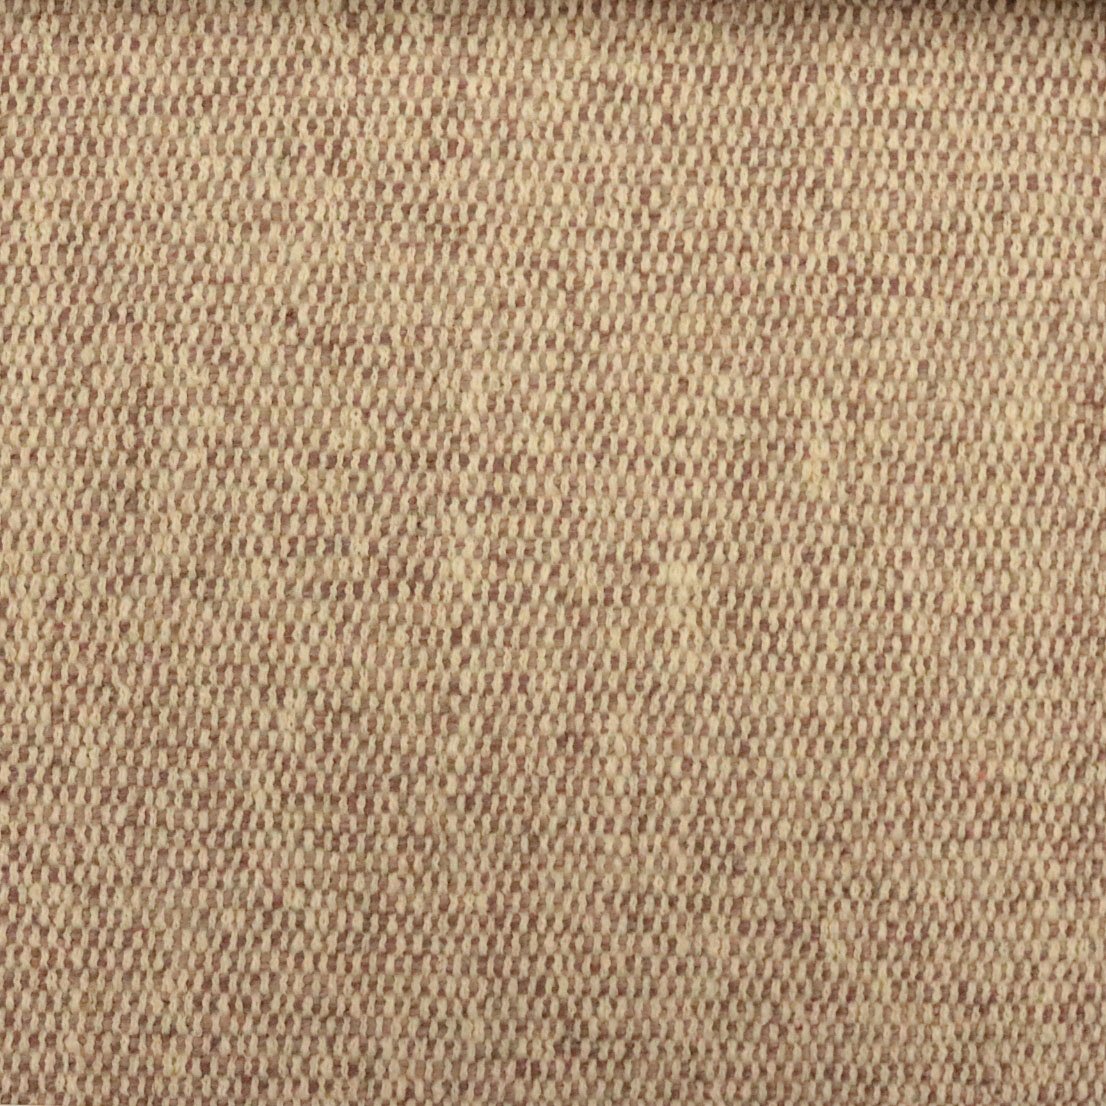 Bark Brown Plain Solid Chenille Upholstery Fabric by The Yard